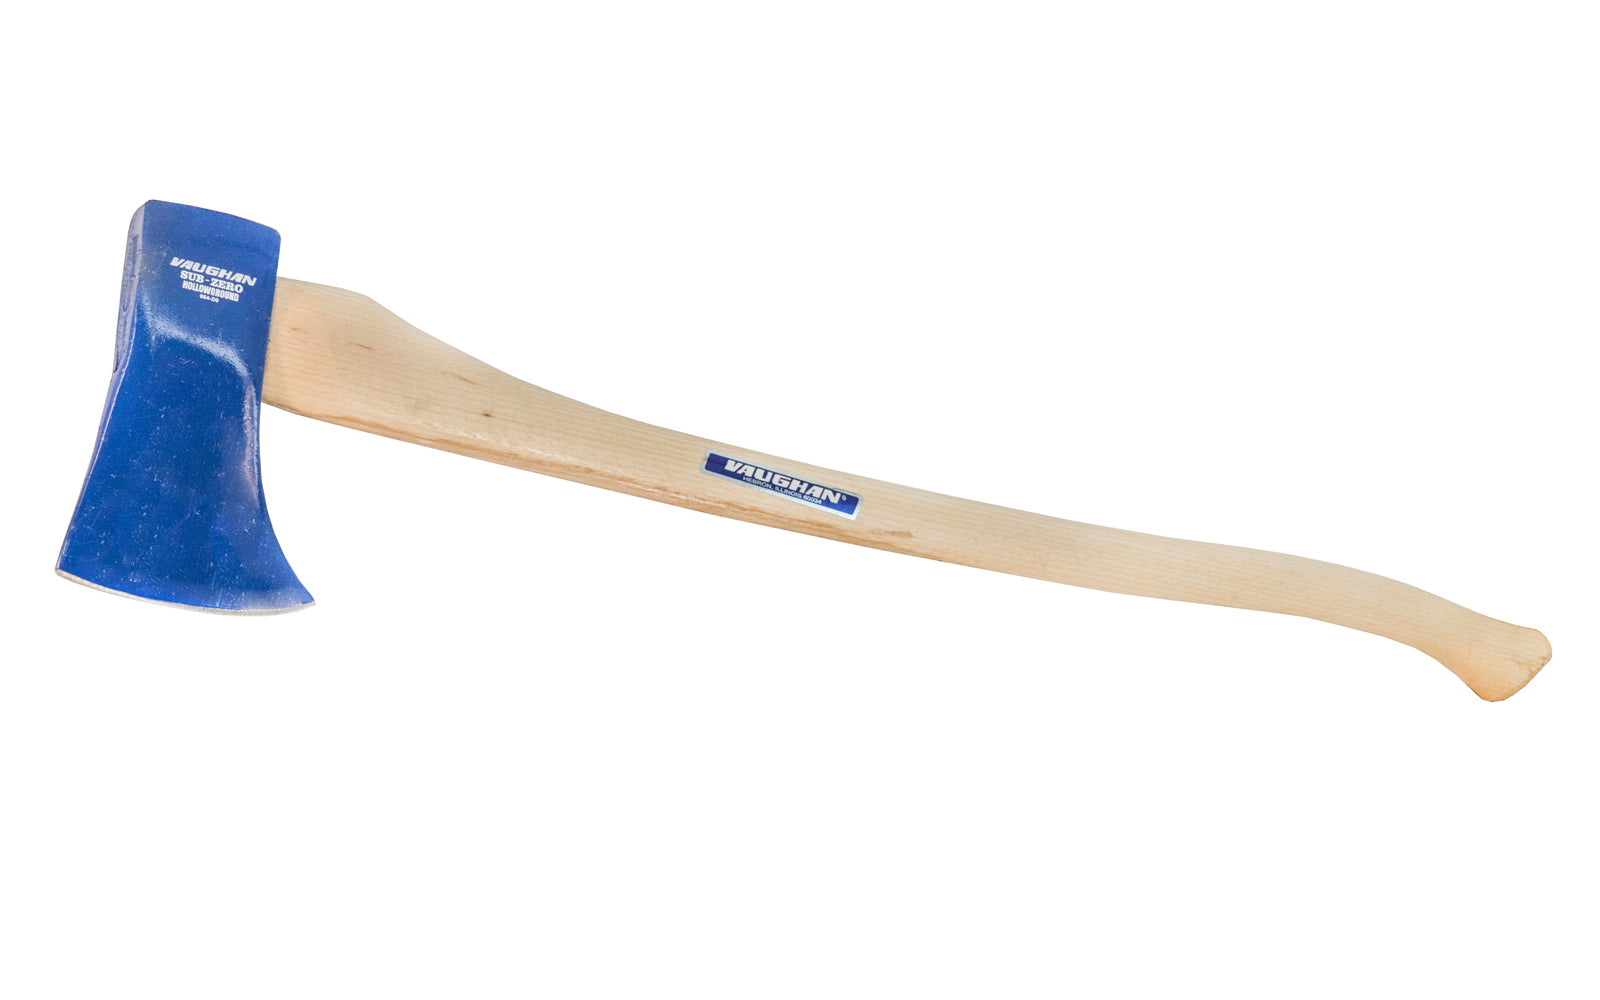 Vaughan's single bit "Sub-Zero" is a 3-1/2 lb. axe. Hollow ground blades permit deeper cuts & easier release. 4-3/4" cutting edge. Rust-resistant blue finish. Hickory handle.  34" overall length.  051218301014